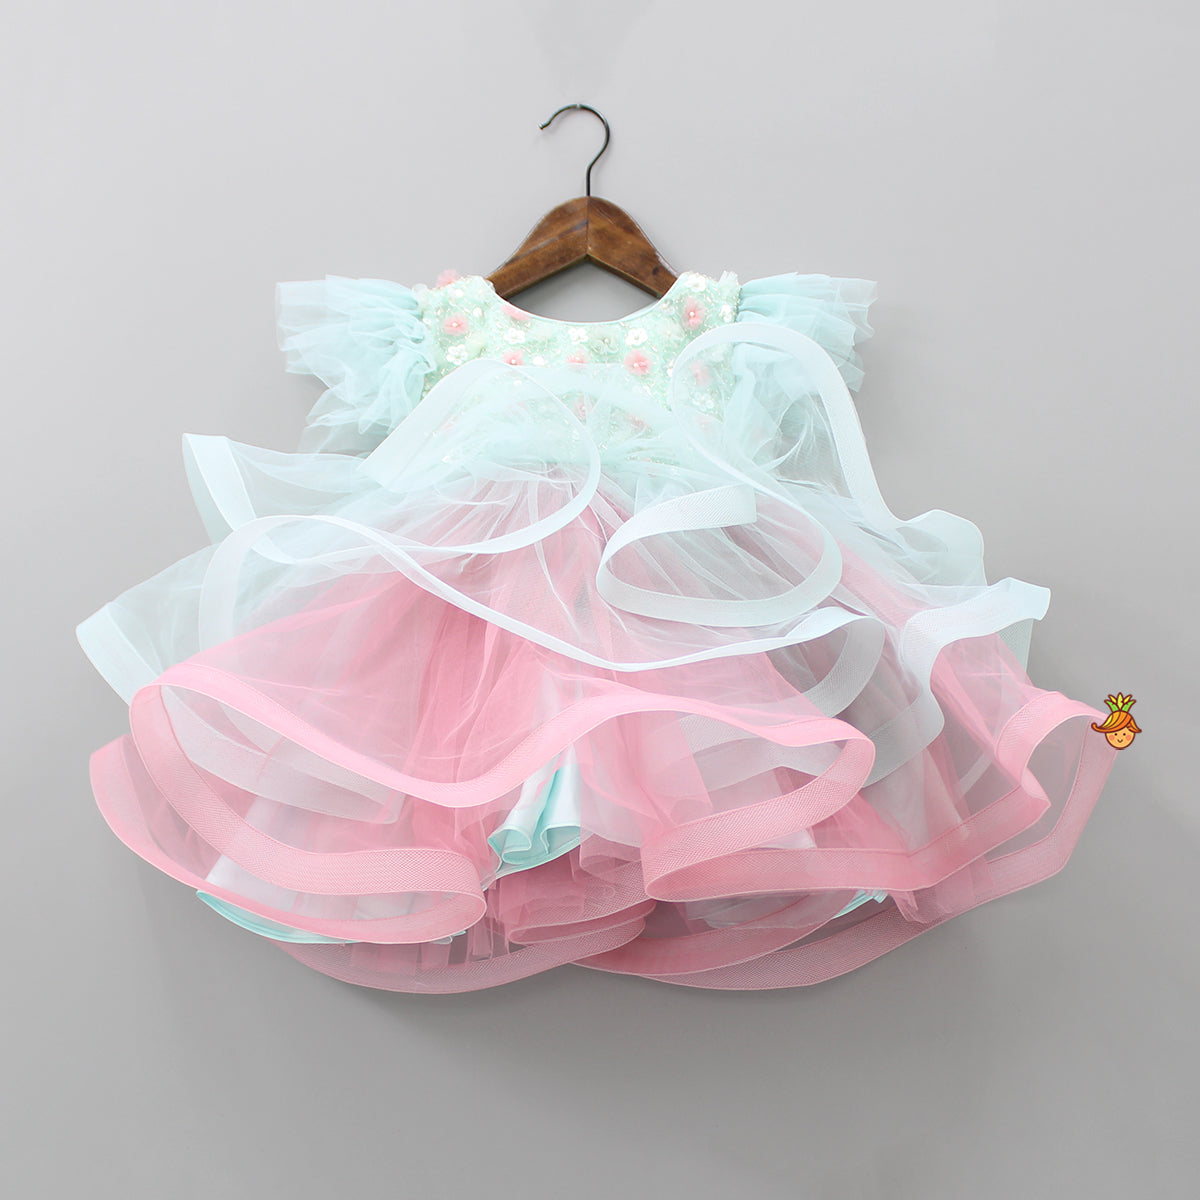 Pre Order: Net Flowers And Sequins Embellished Ruffled Dress